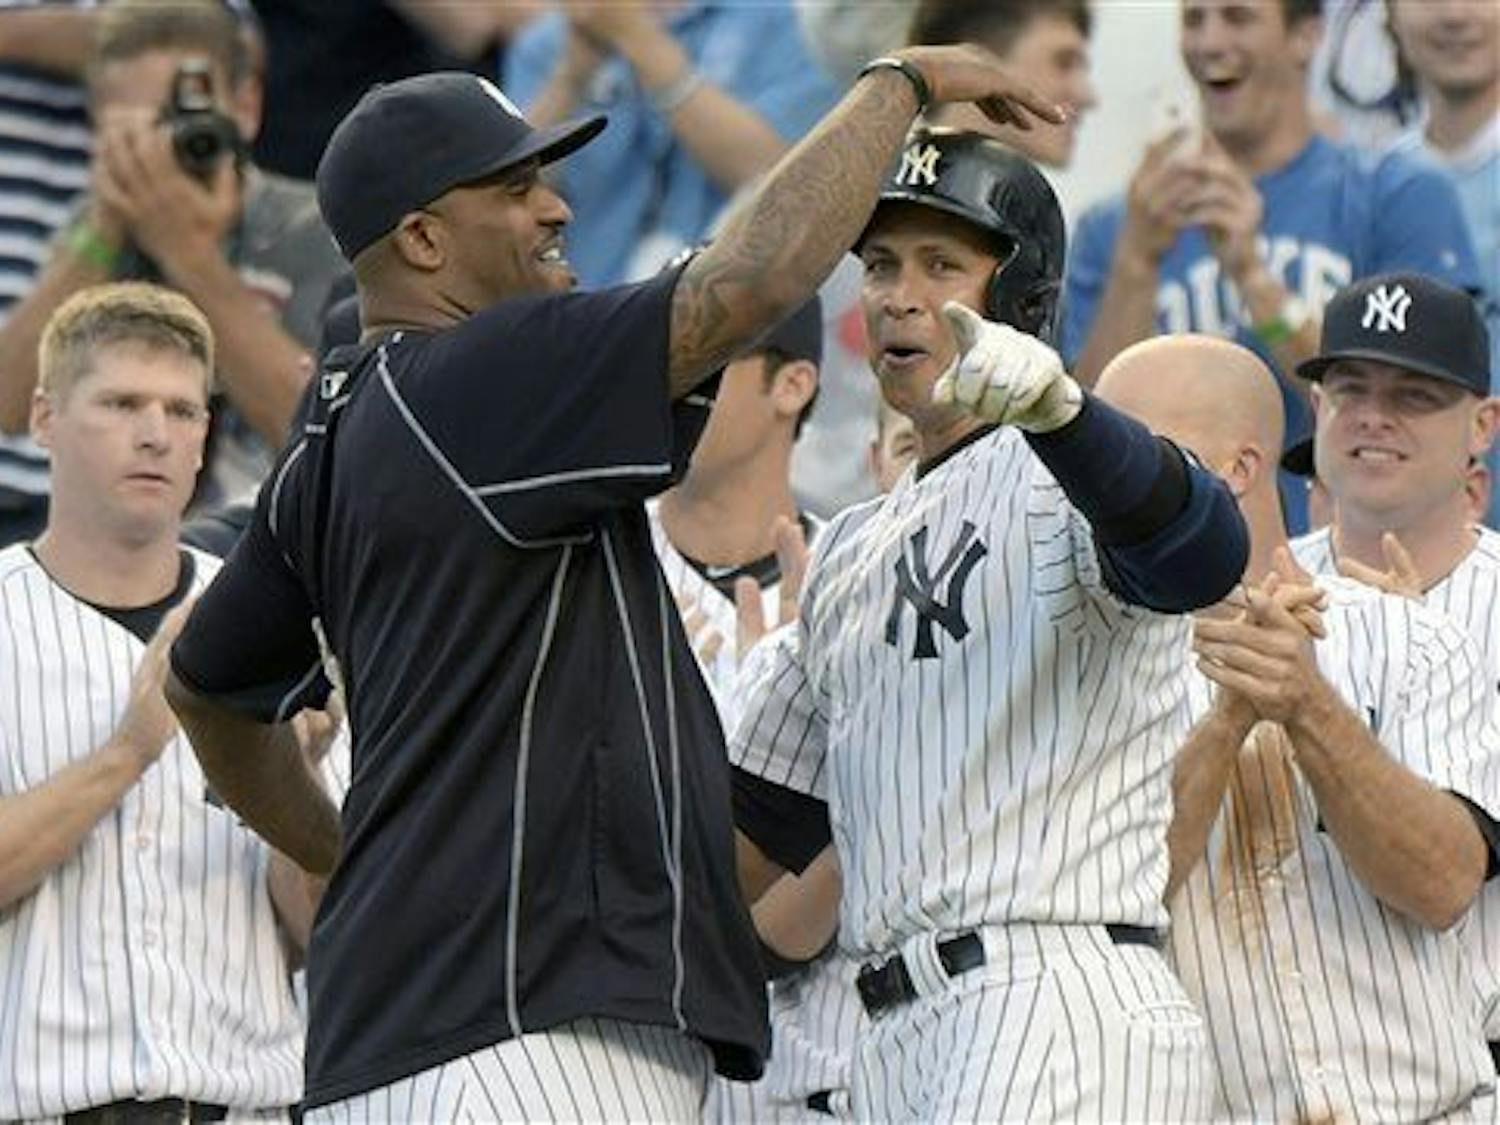 New York Yankees' Alex Rodriguez, center right, celebrates with CC Sabathia after Rodriguez hit a home run — his 3,000th career hit — during the first inning of a baseball game against the Detroit Tigers on June 19 at Yankee Stadium in New York.